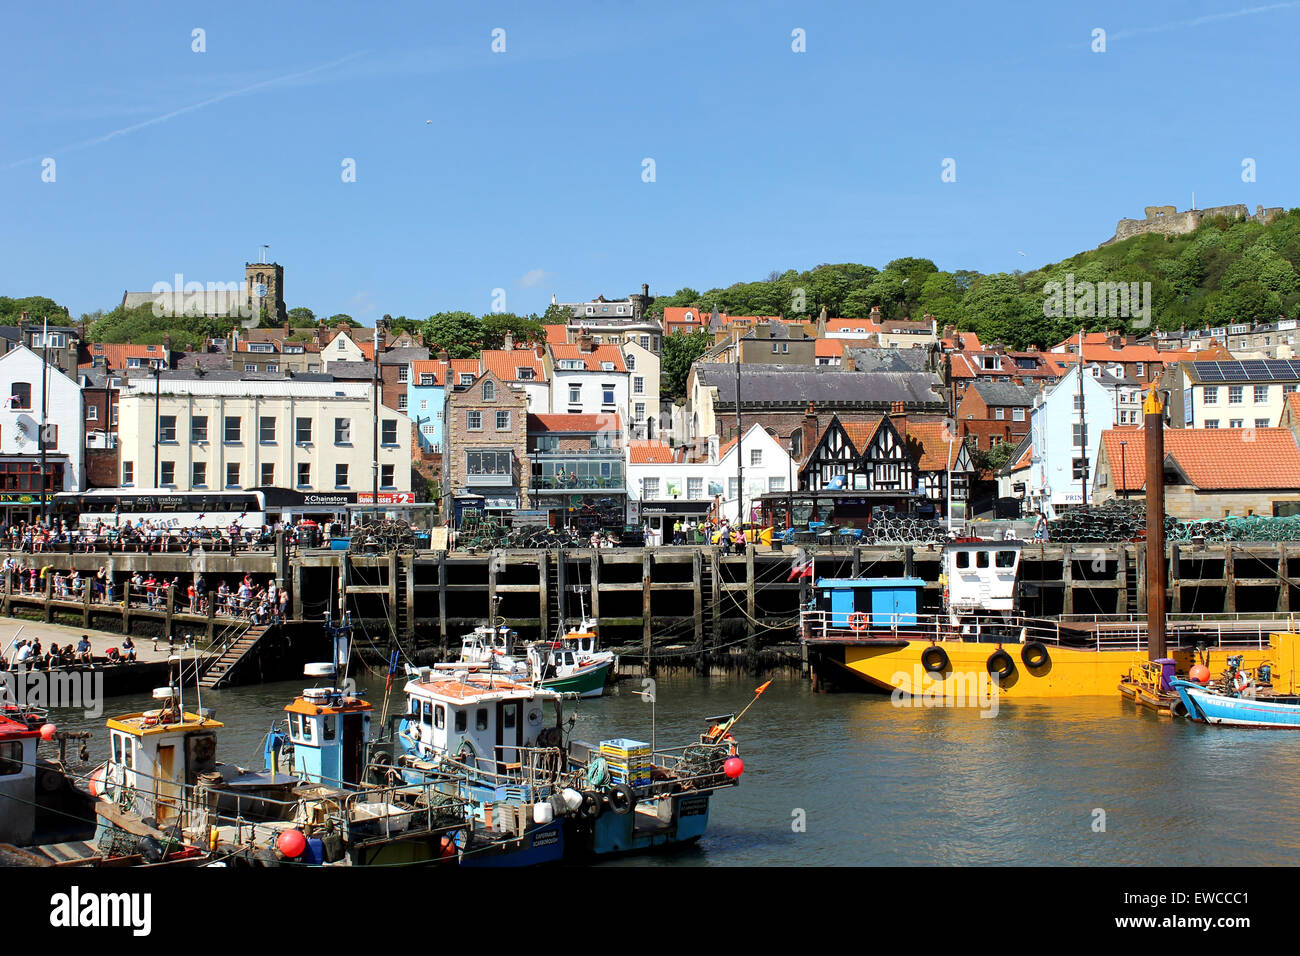 SCARBOROUGH, NORTH YORKSHIRE, ENGLAND - 19th May 2014: Scarborough town and harbor seaside resort on the 19th of May 2014. This Stock Photo